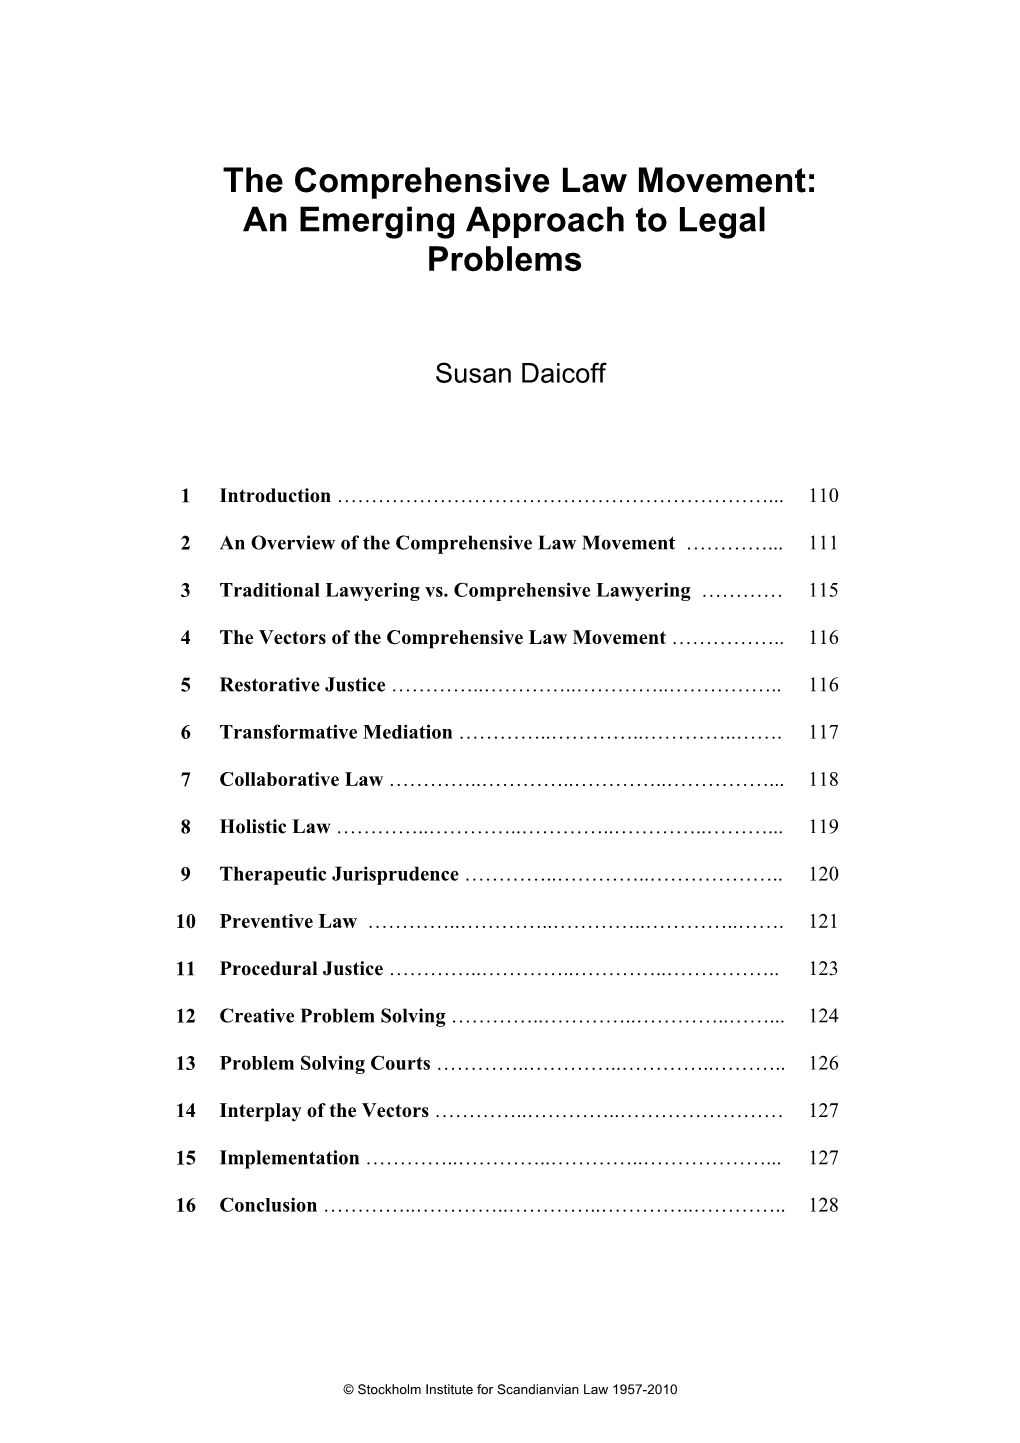 The Comprehensive Law Movement: an Emerging Approach to Legal Problems